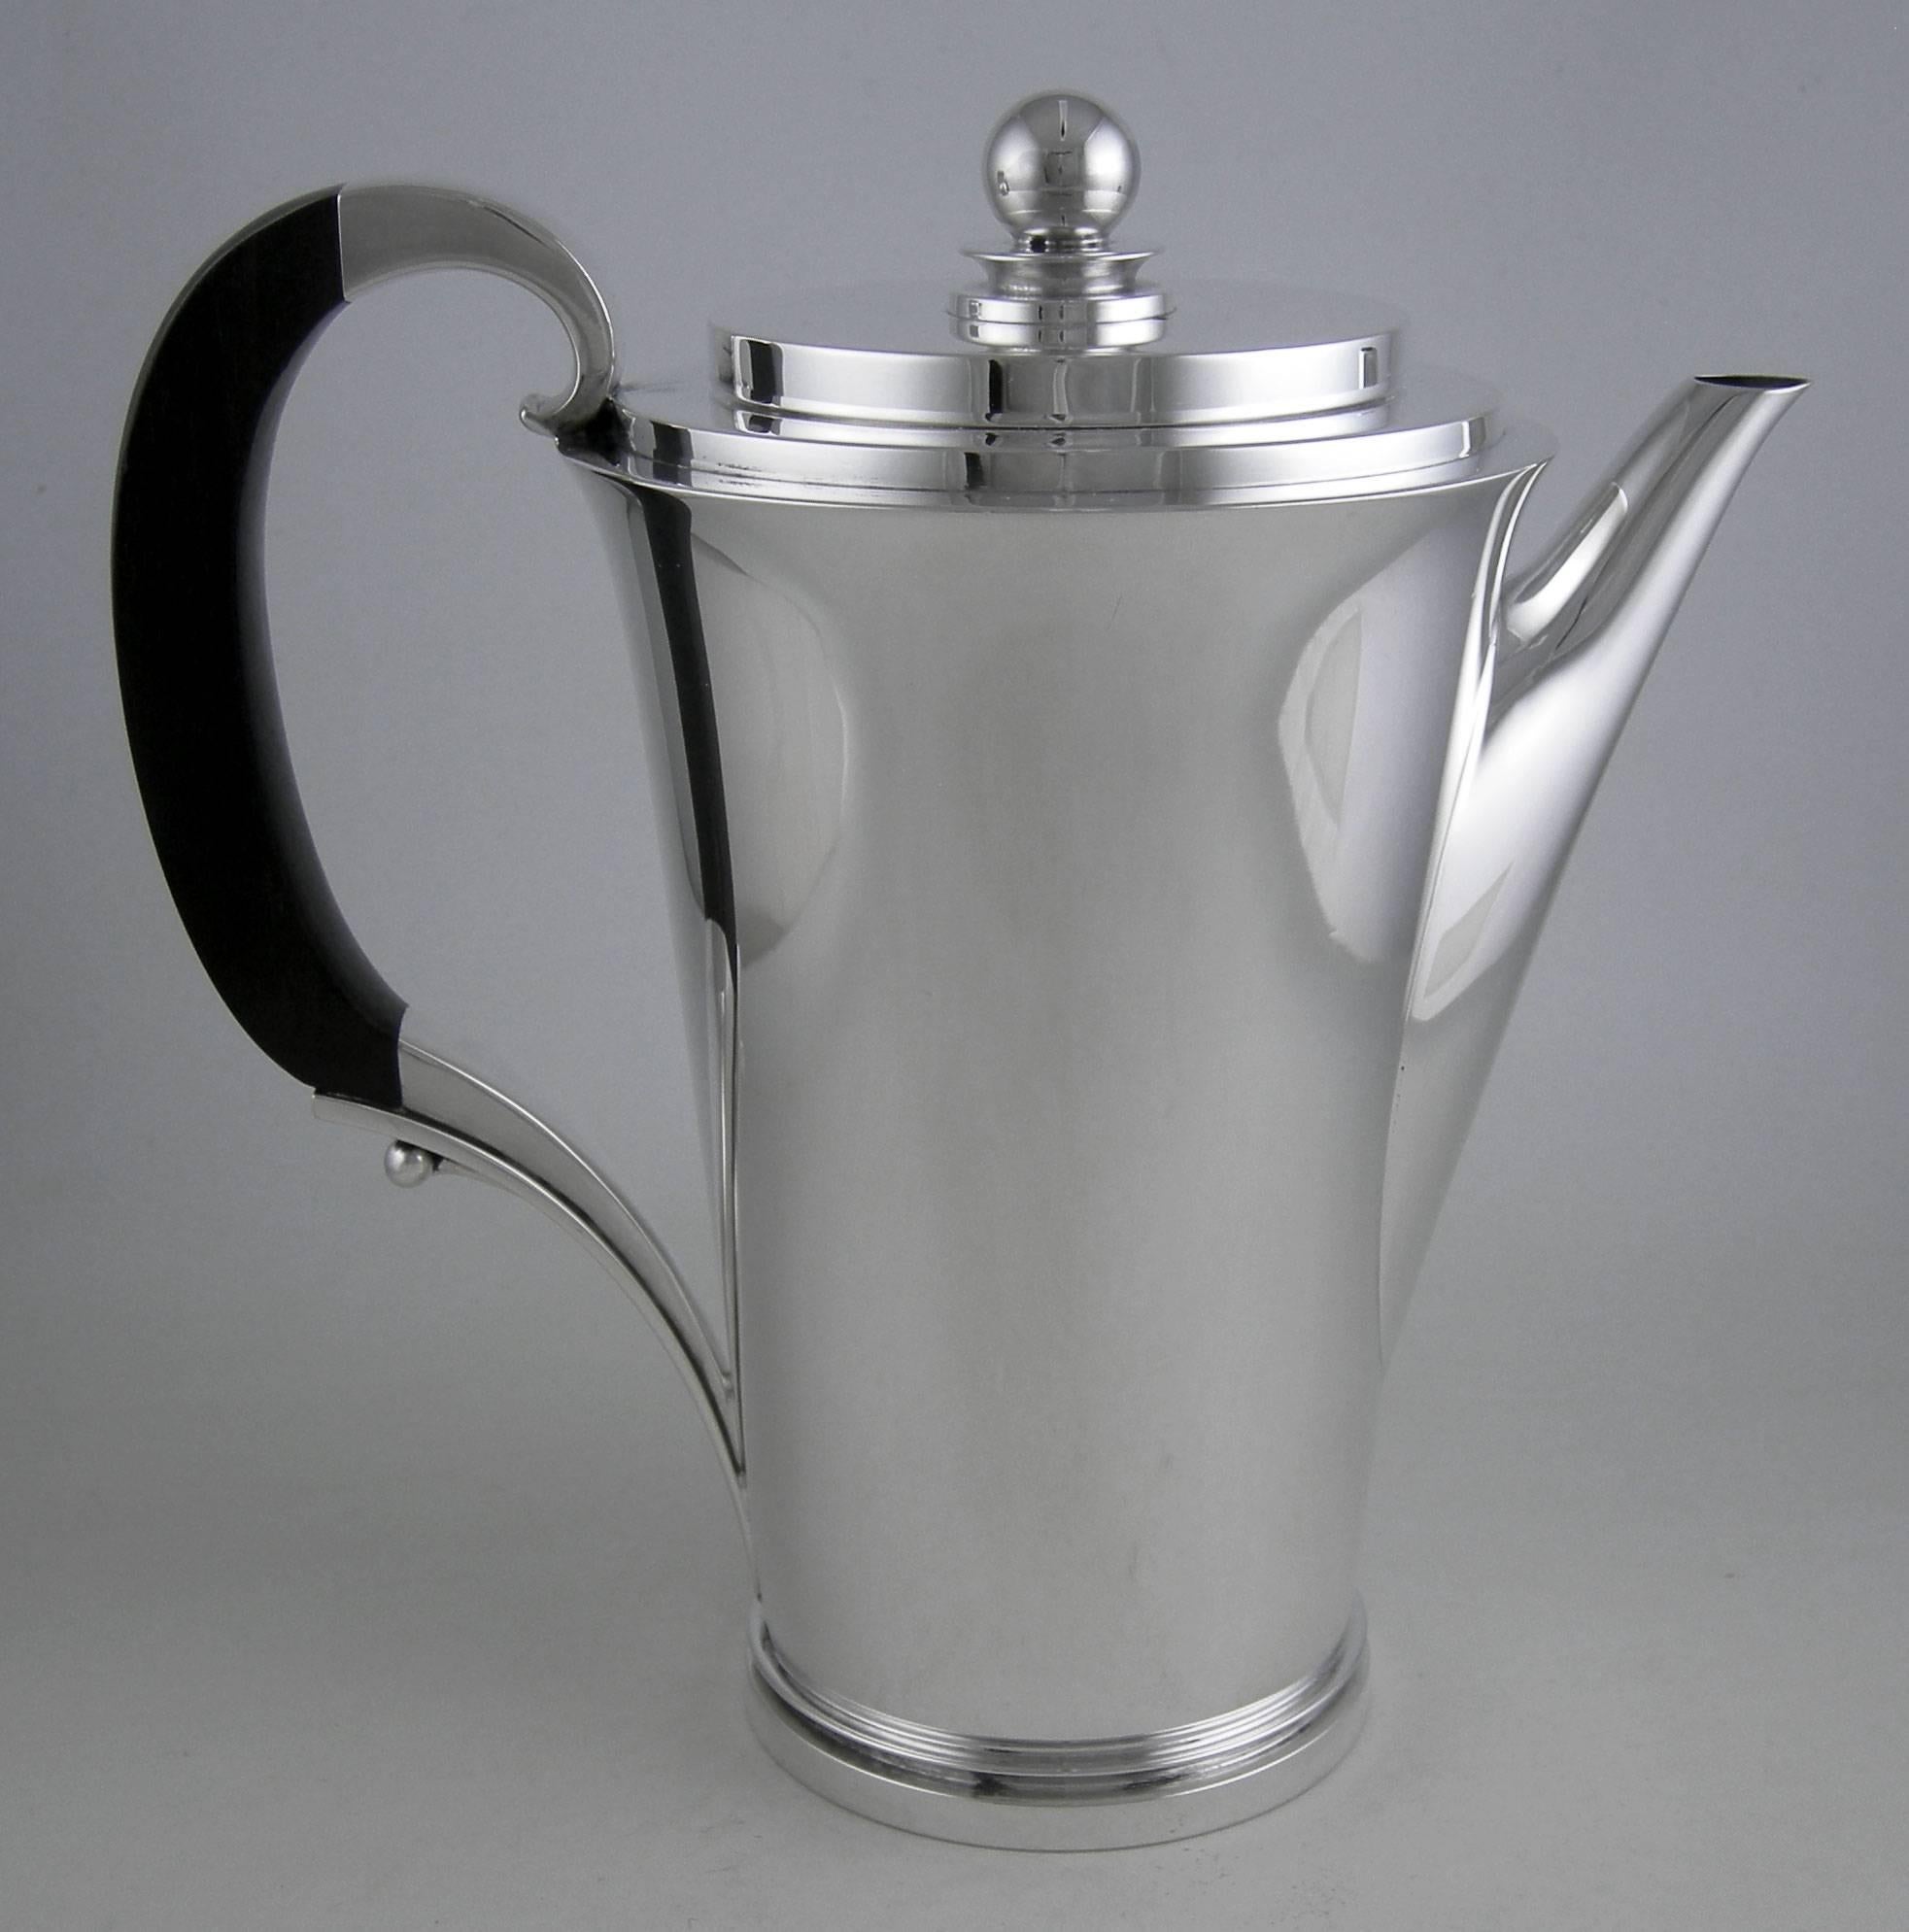 Sterling Georg Jensen Pyramid (1930) three-piece coffee set.

Rare and desirable!

Measures: Coffee pot: 7 3/4